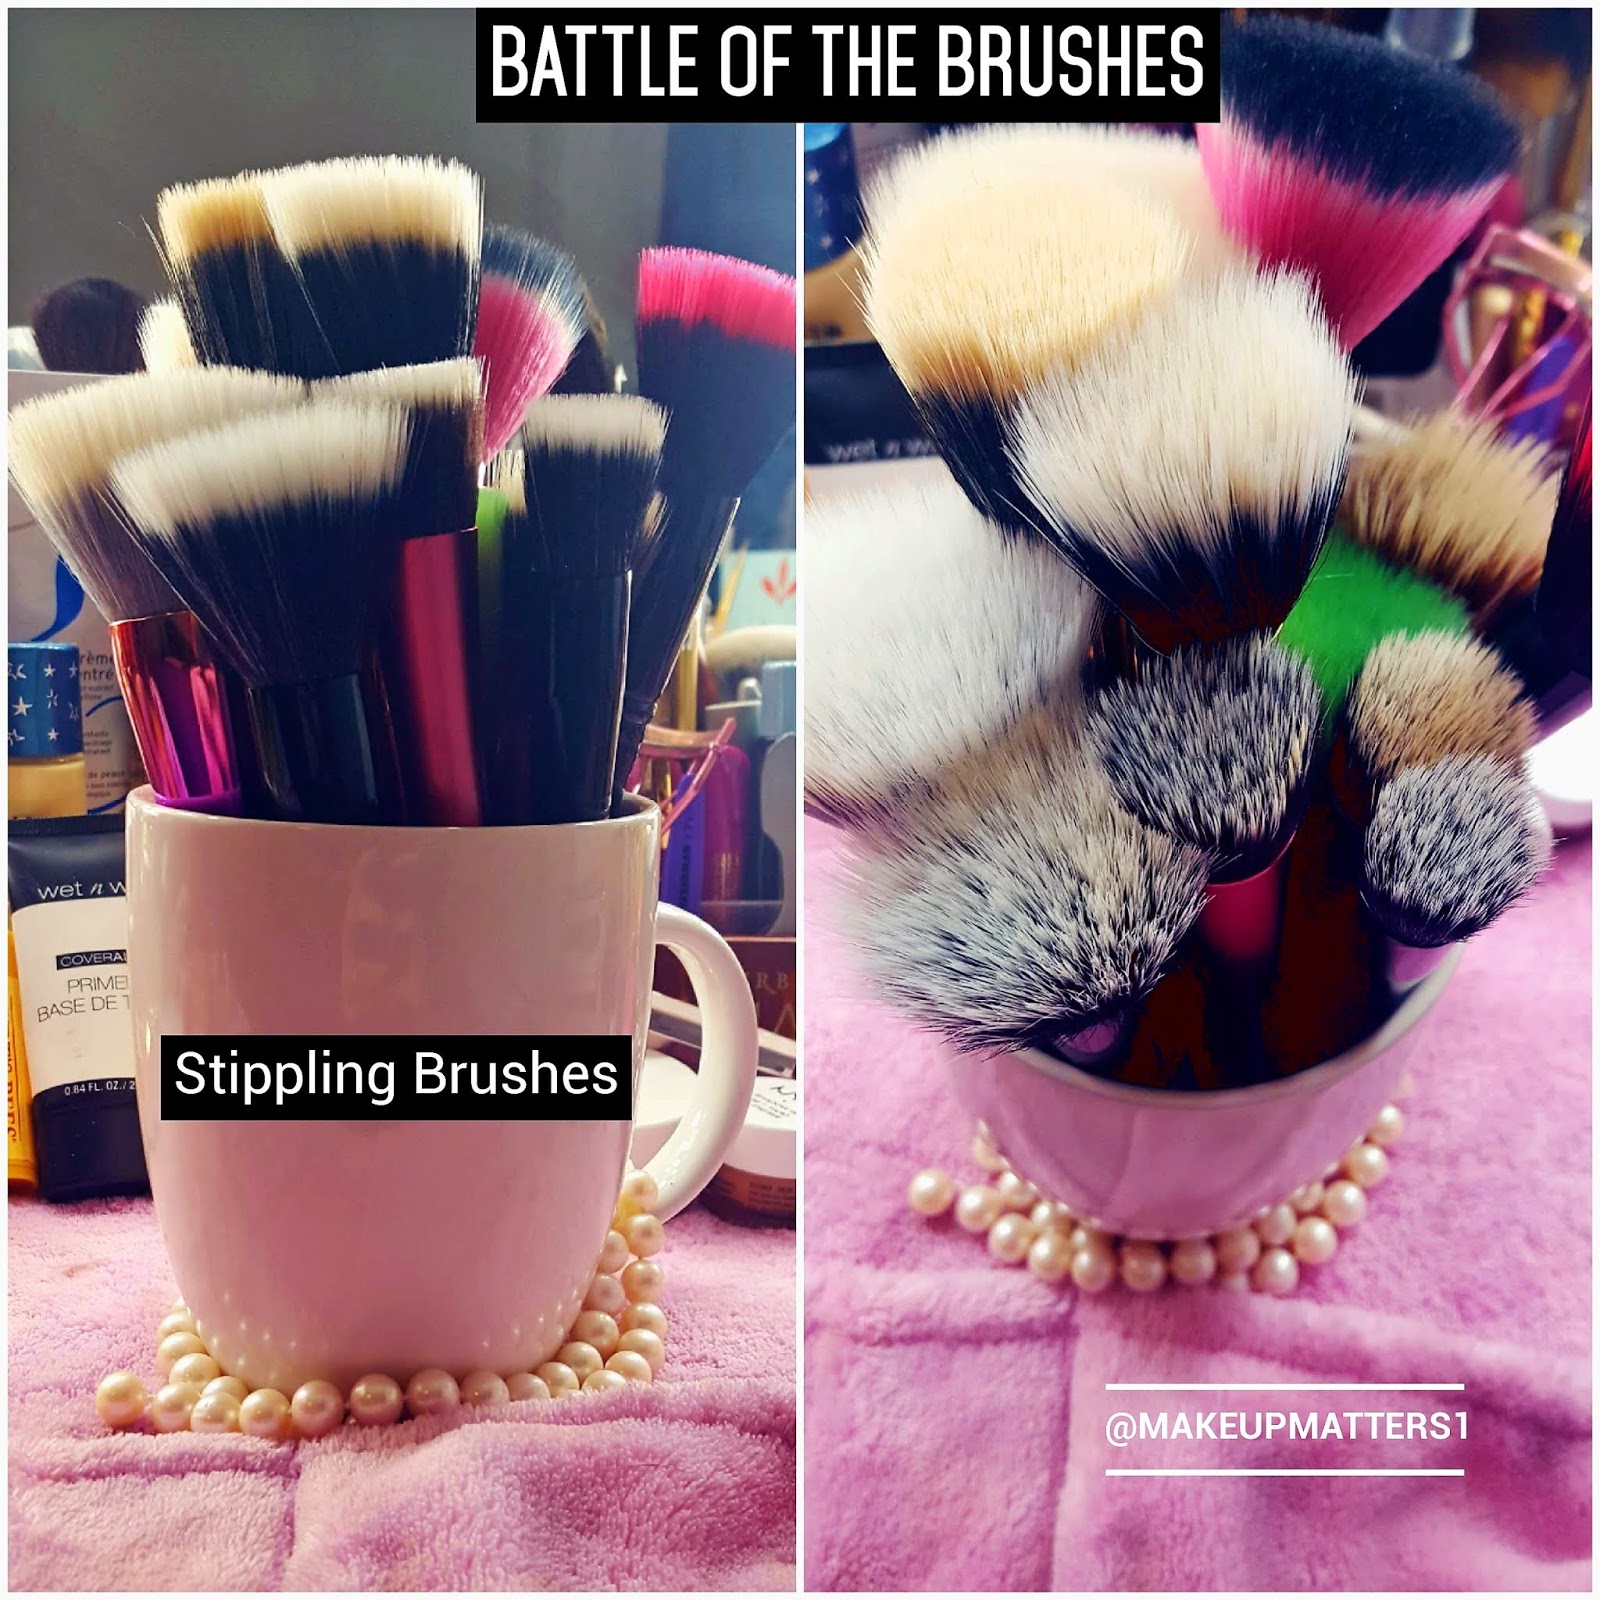 Makeup Matters: It's All About STIPPLING BRUSHES! - Battle of the Brushes